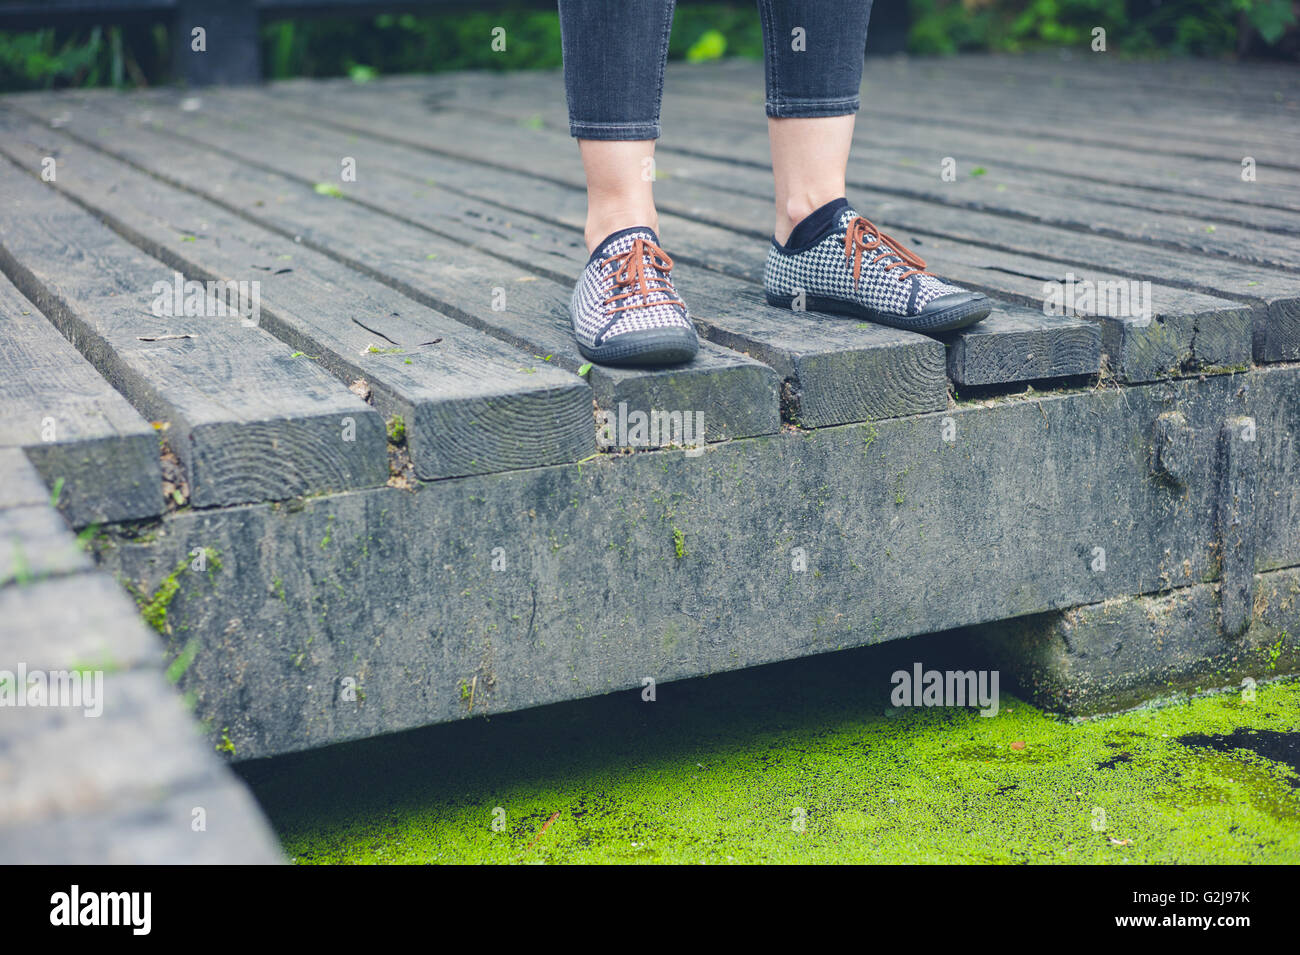 The feet of a young woman standing on a wooden deck by a dirty pond with algae Stock Photo